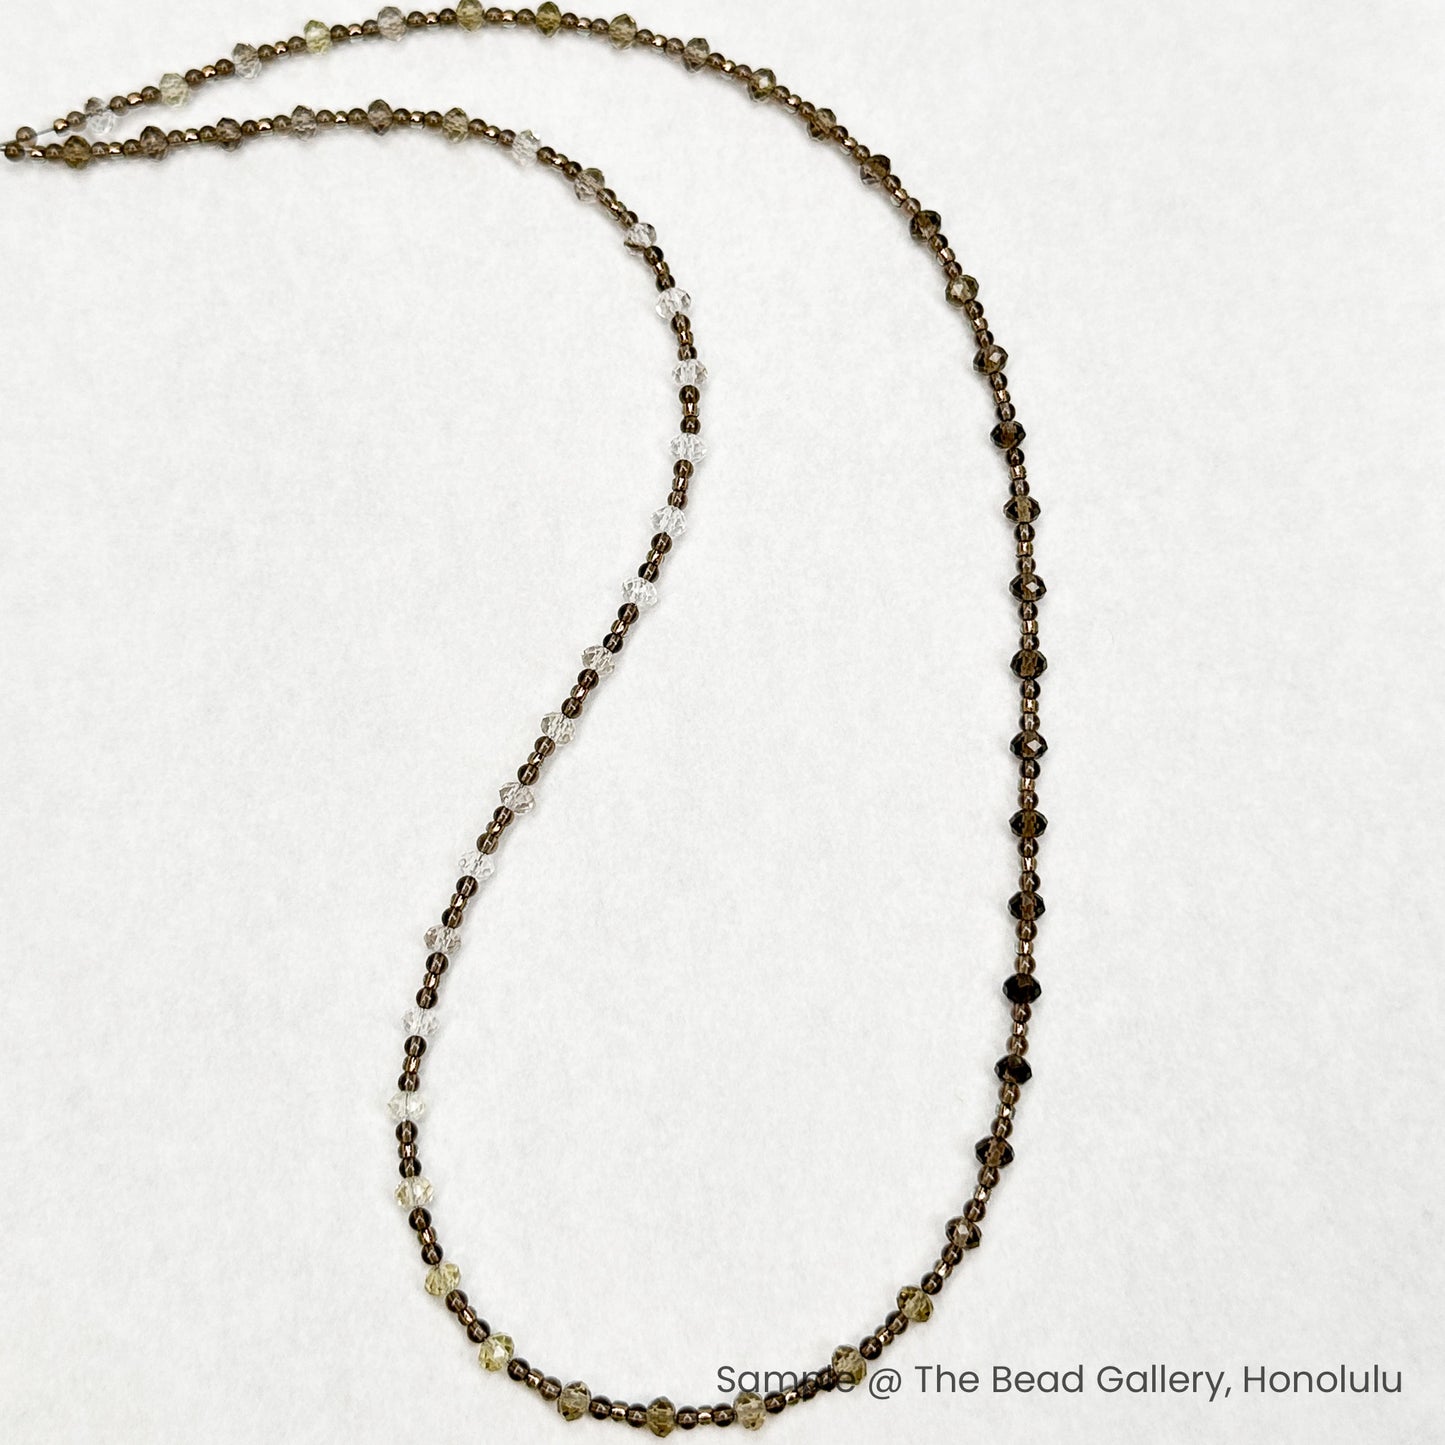 Smoky Quartz 4x3mm Ombre Faceted Rondelle Bead - 7.5" Strand-The Bead Gallery Honolulu